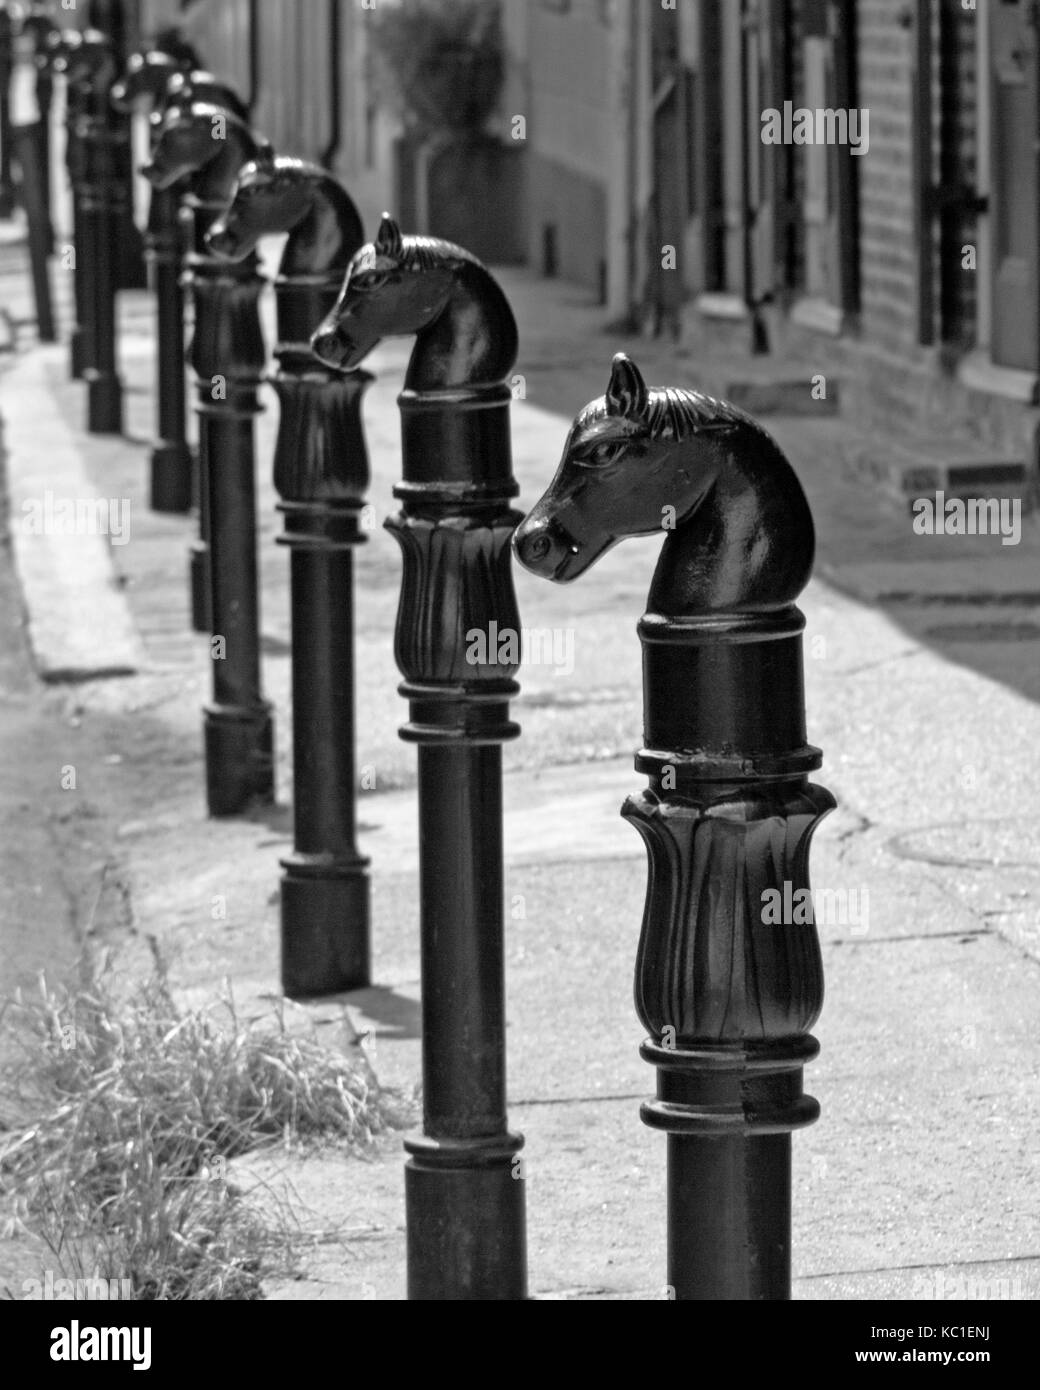 Iron horse head hitching posts in the French Quarter, New Orleans, Louisiana. Stock Photo